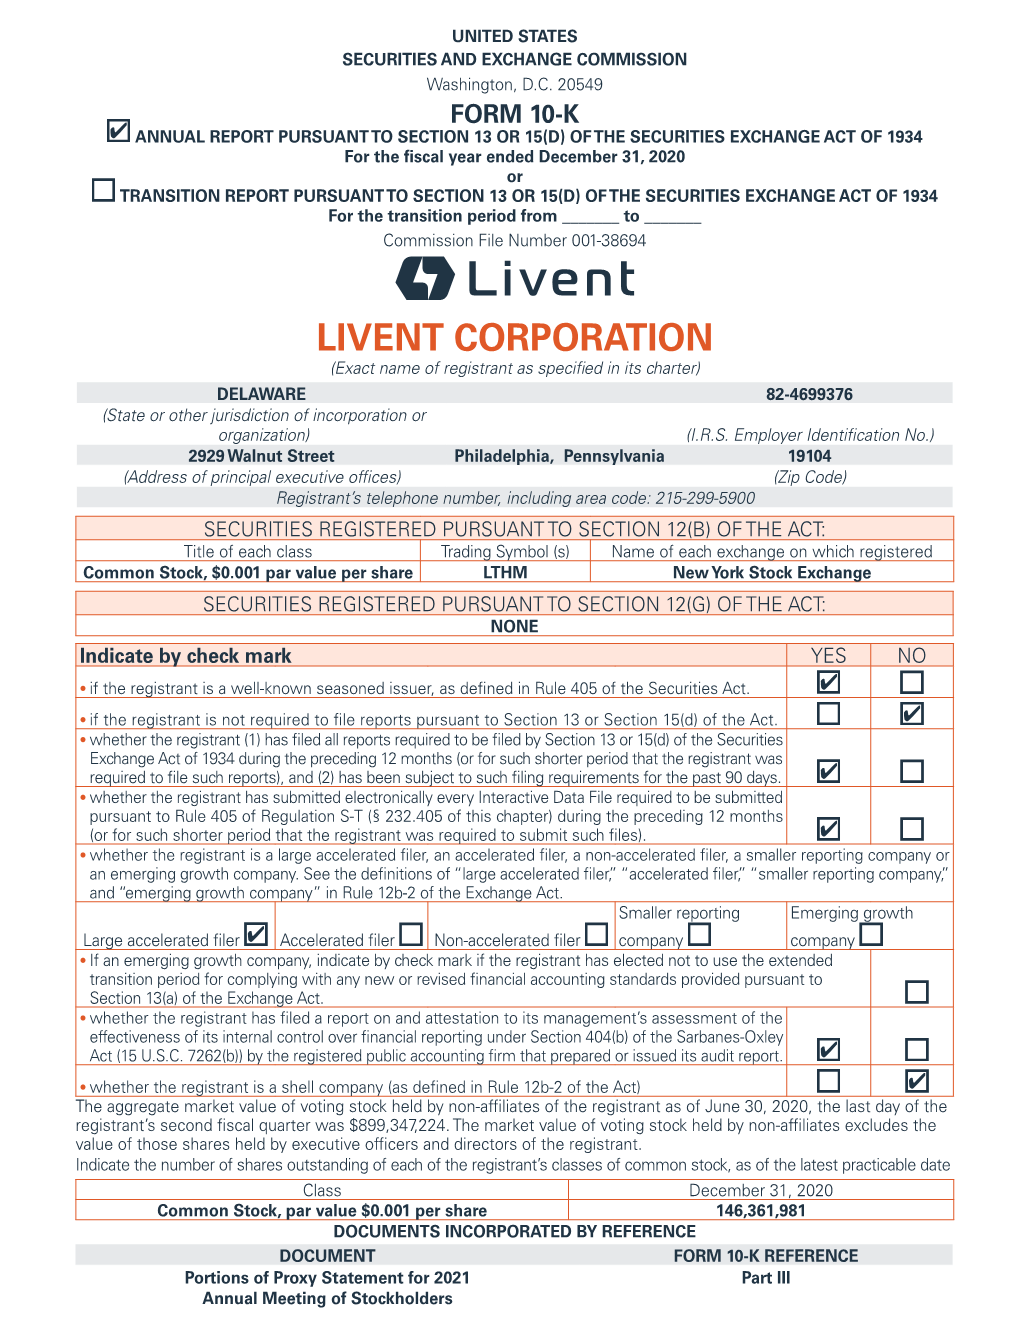 LIVENT CORPORATION (Exact Name of Registrant As Specified in Its Charter) DELAWARE 82-4699376 (State Or Other Jurisdiction of Incorporation Or Organization) (I.R.S